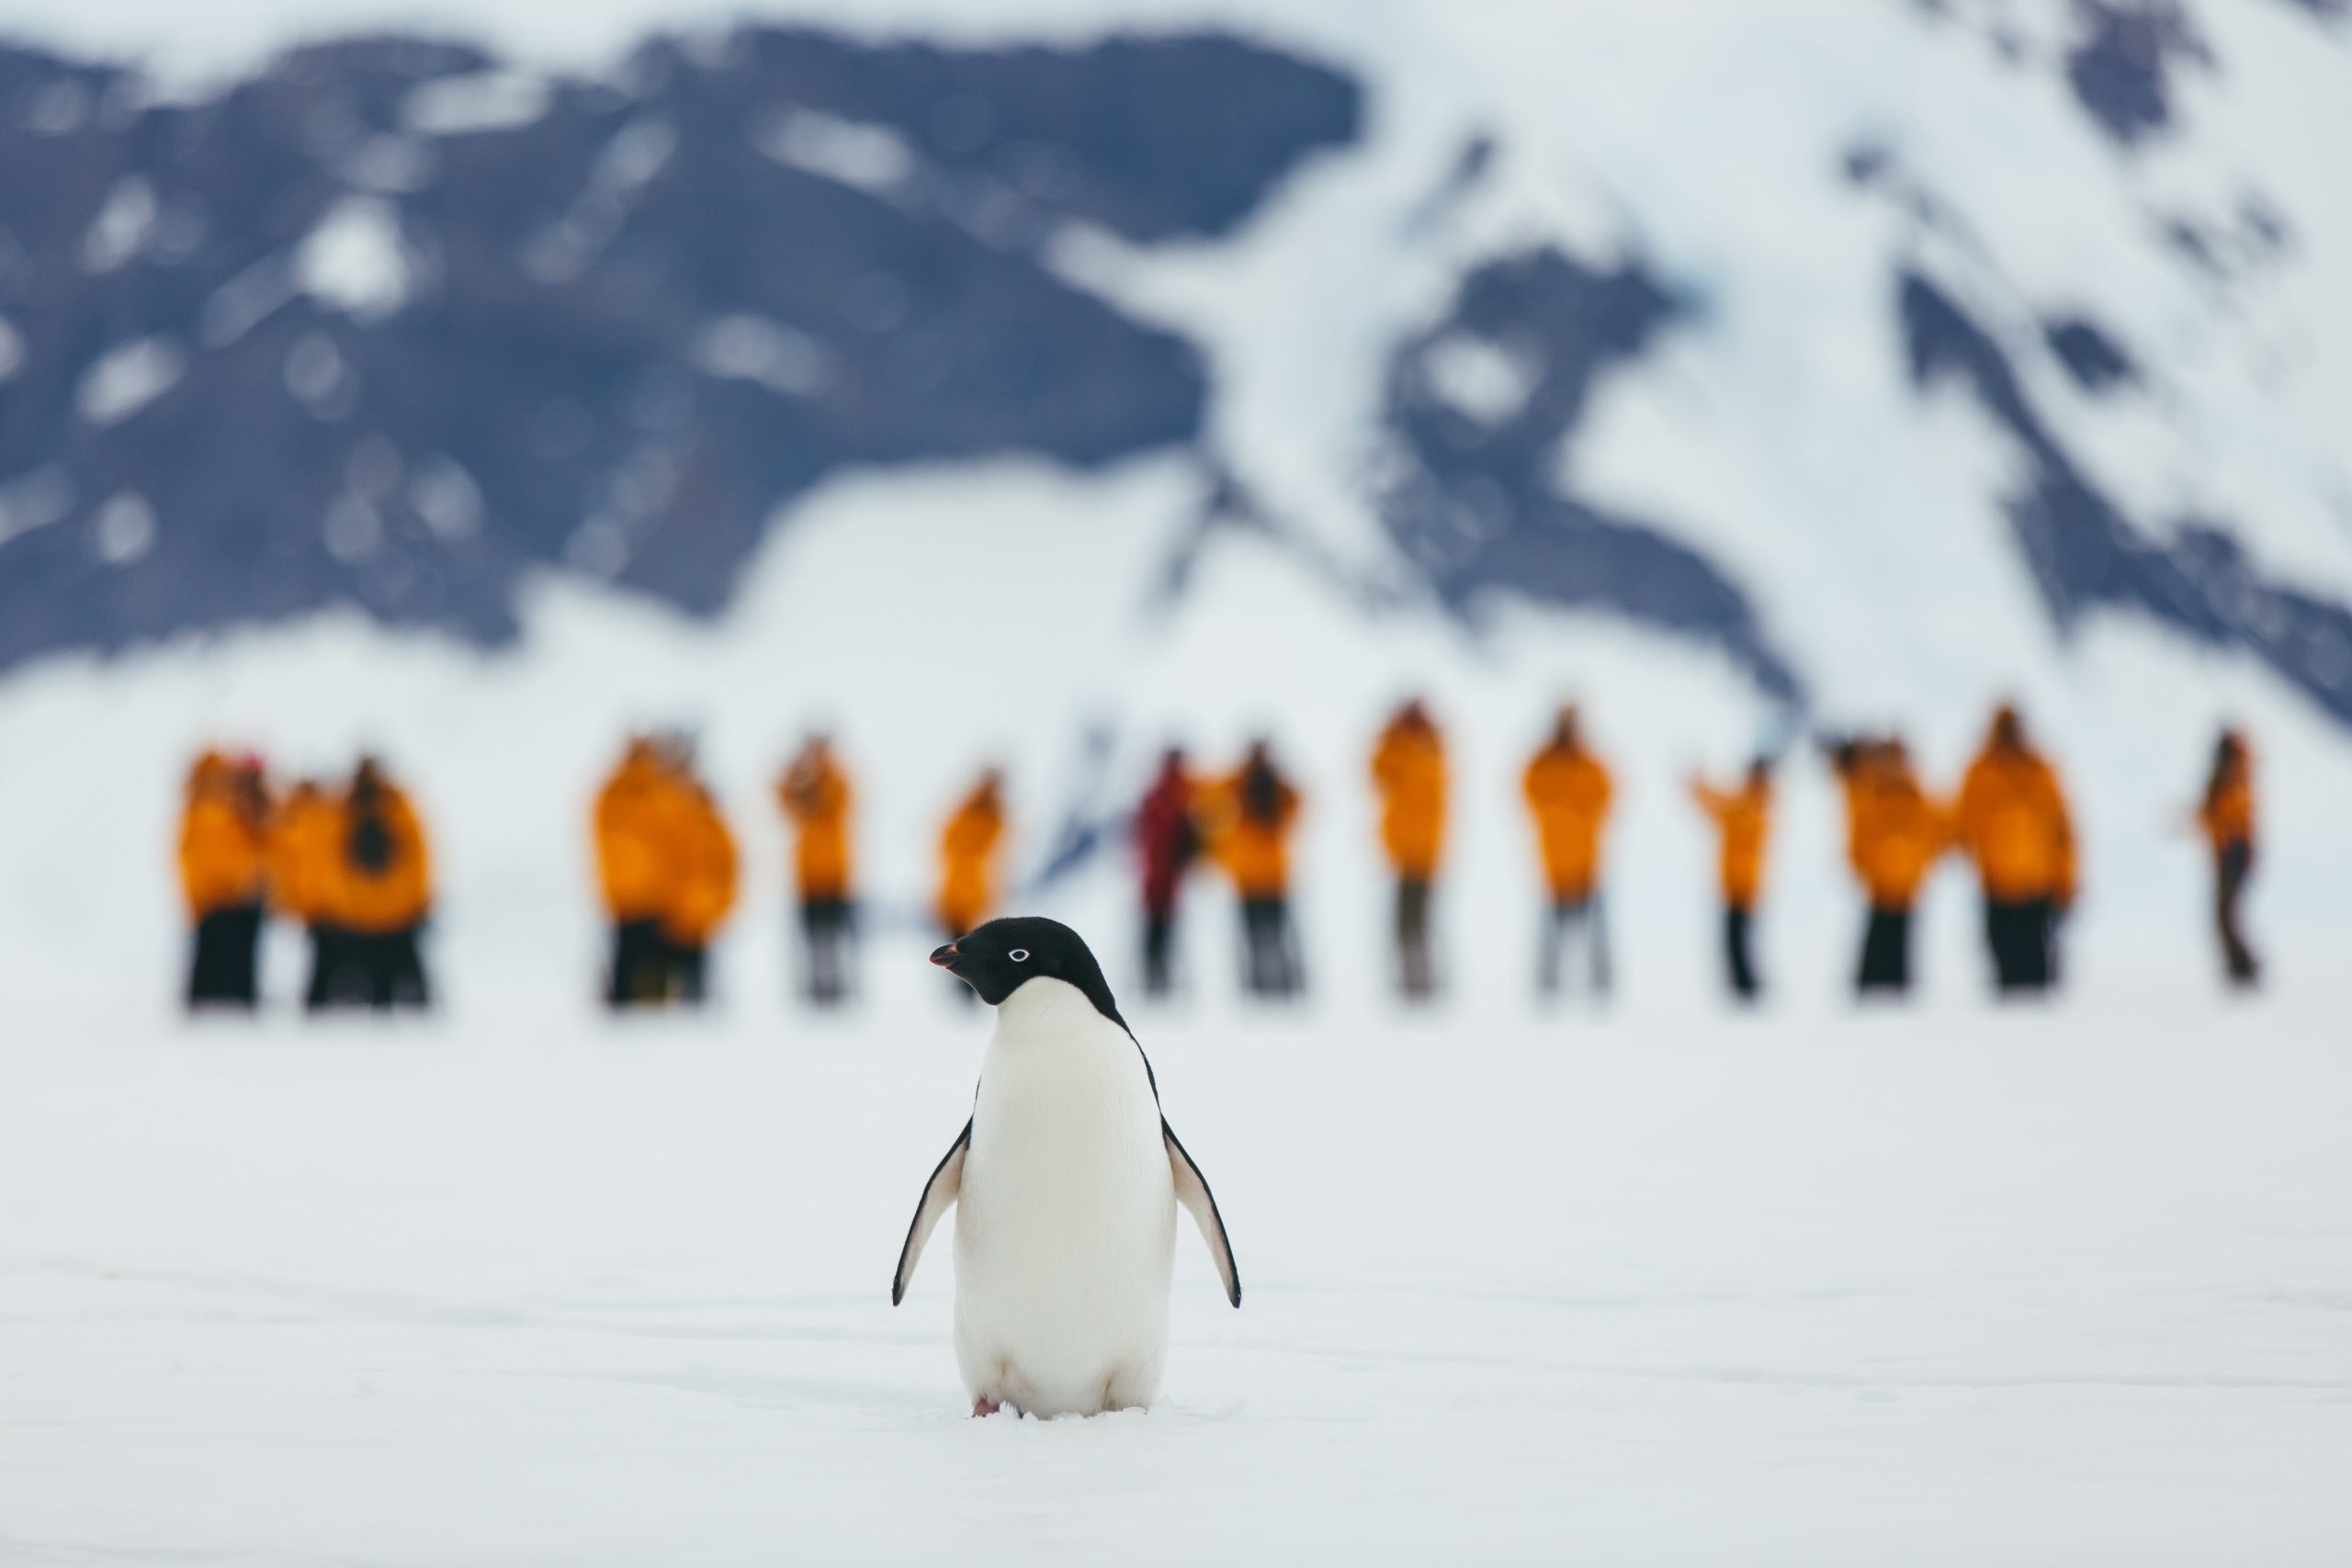 penguin walking on ice toward camera with people in orange coats in the background